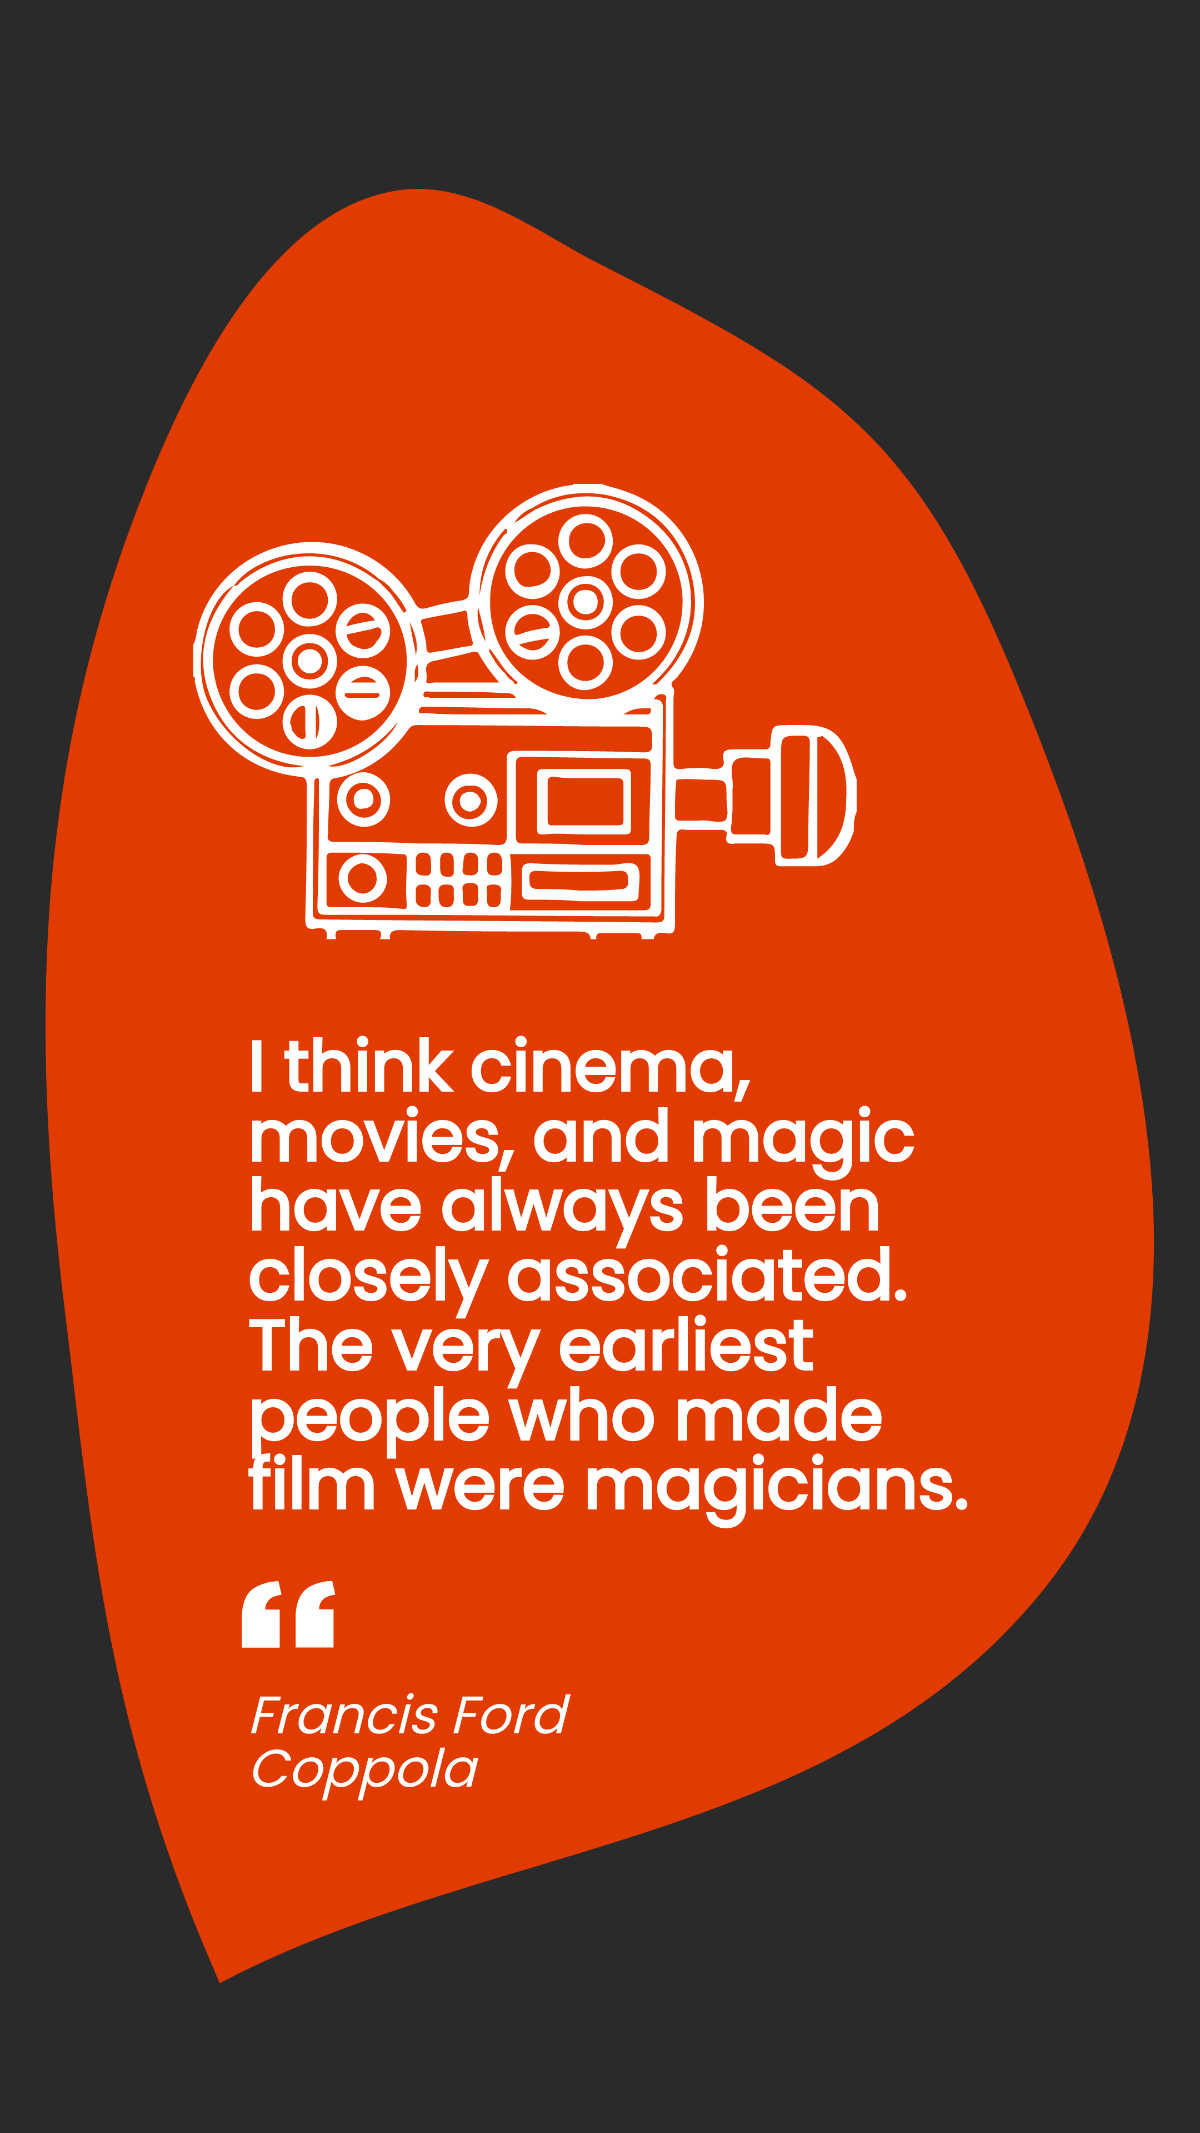 Francis Ford Coppola - I think cinema, movies, and magic have always been closely associated. The very earliest people who made film were magicians. Template